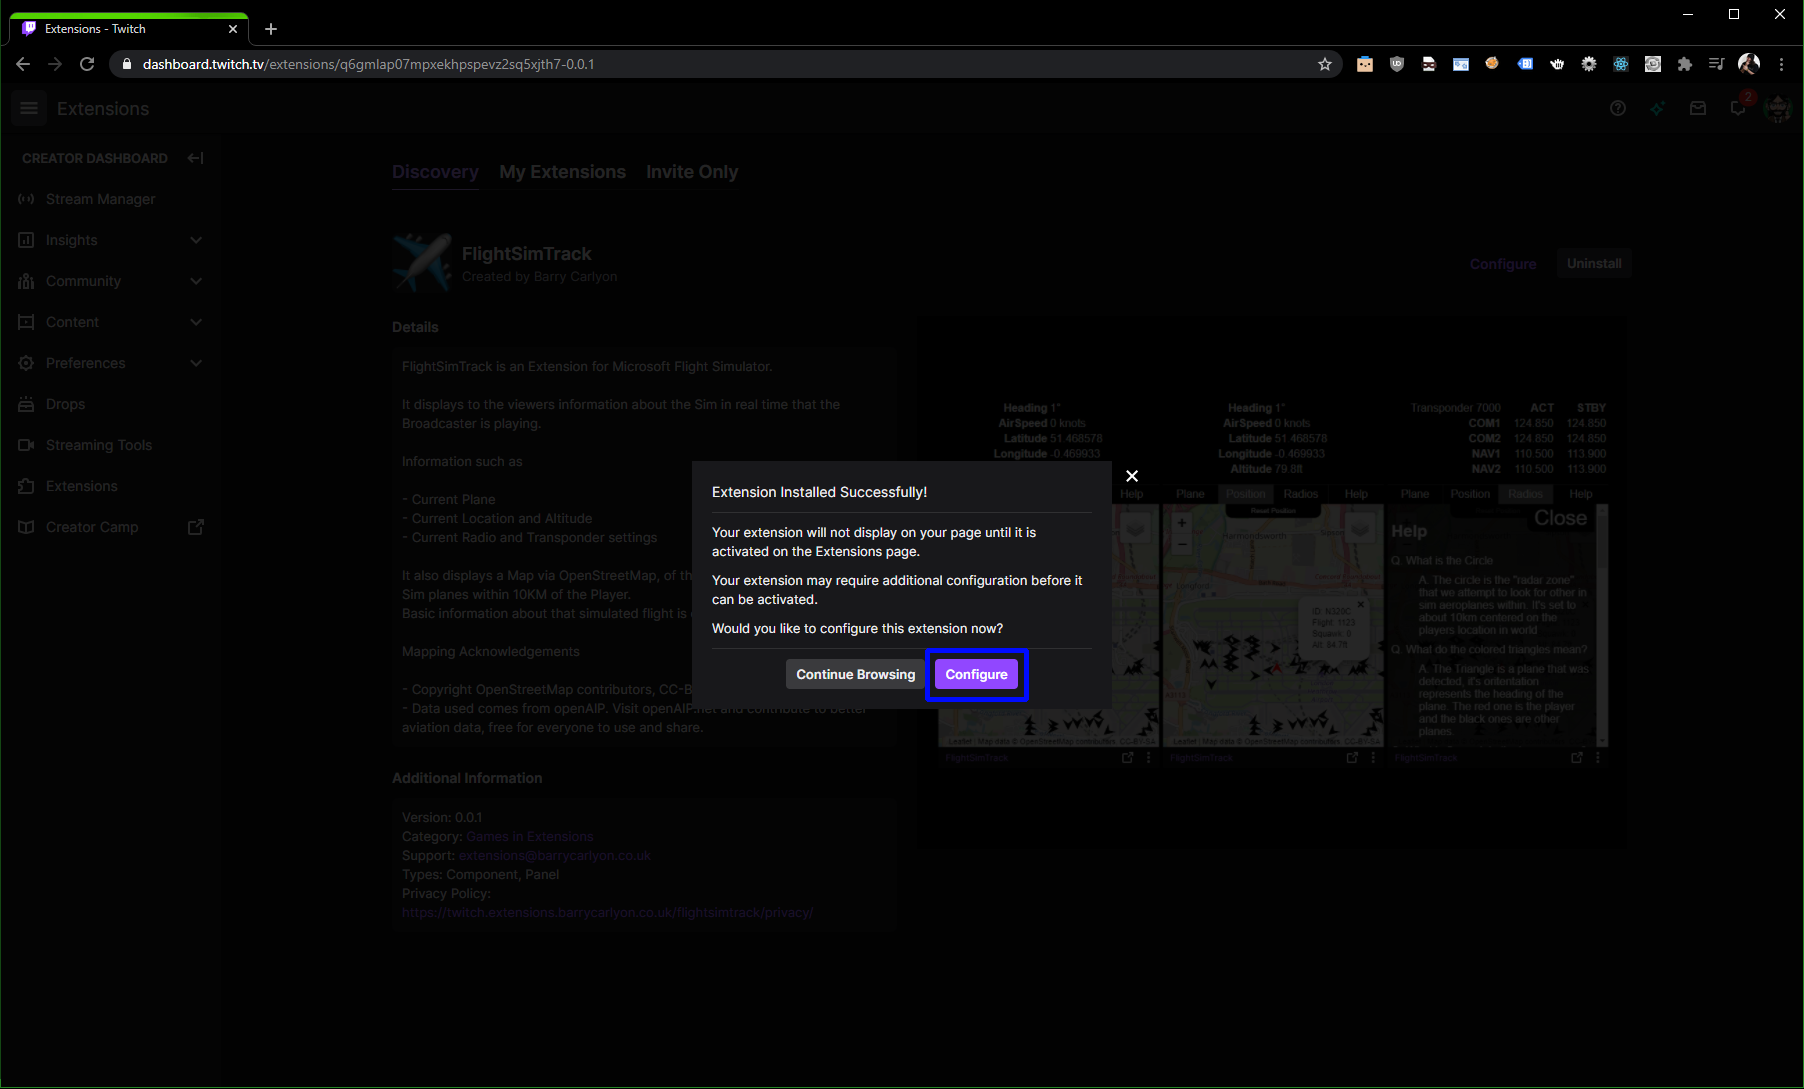 Configure on Twitch